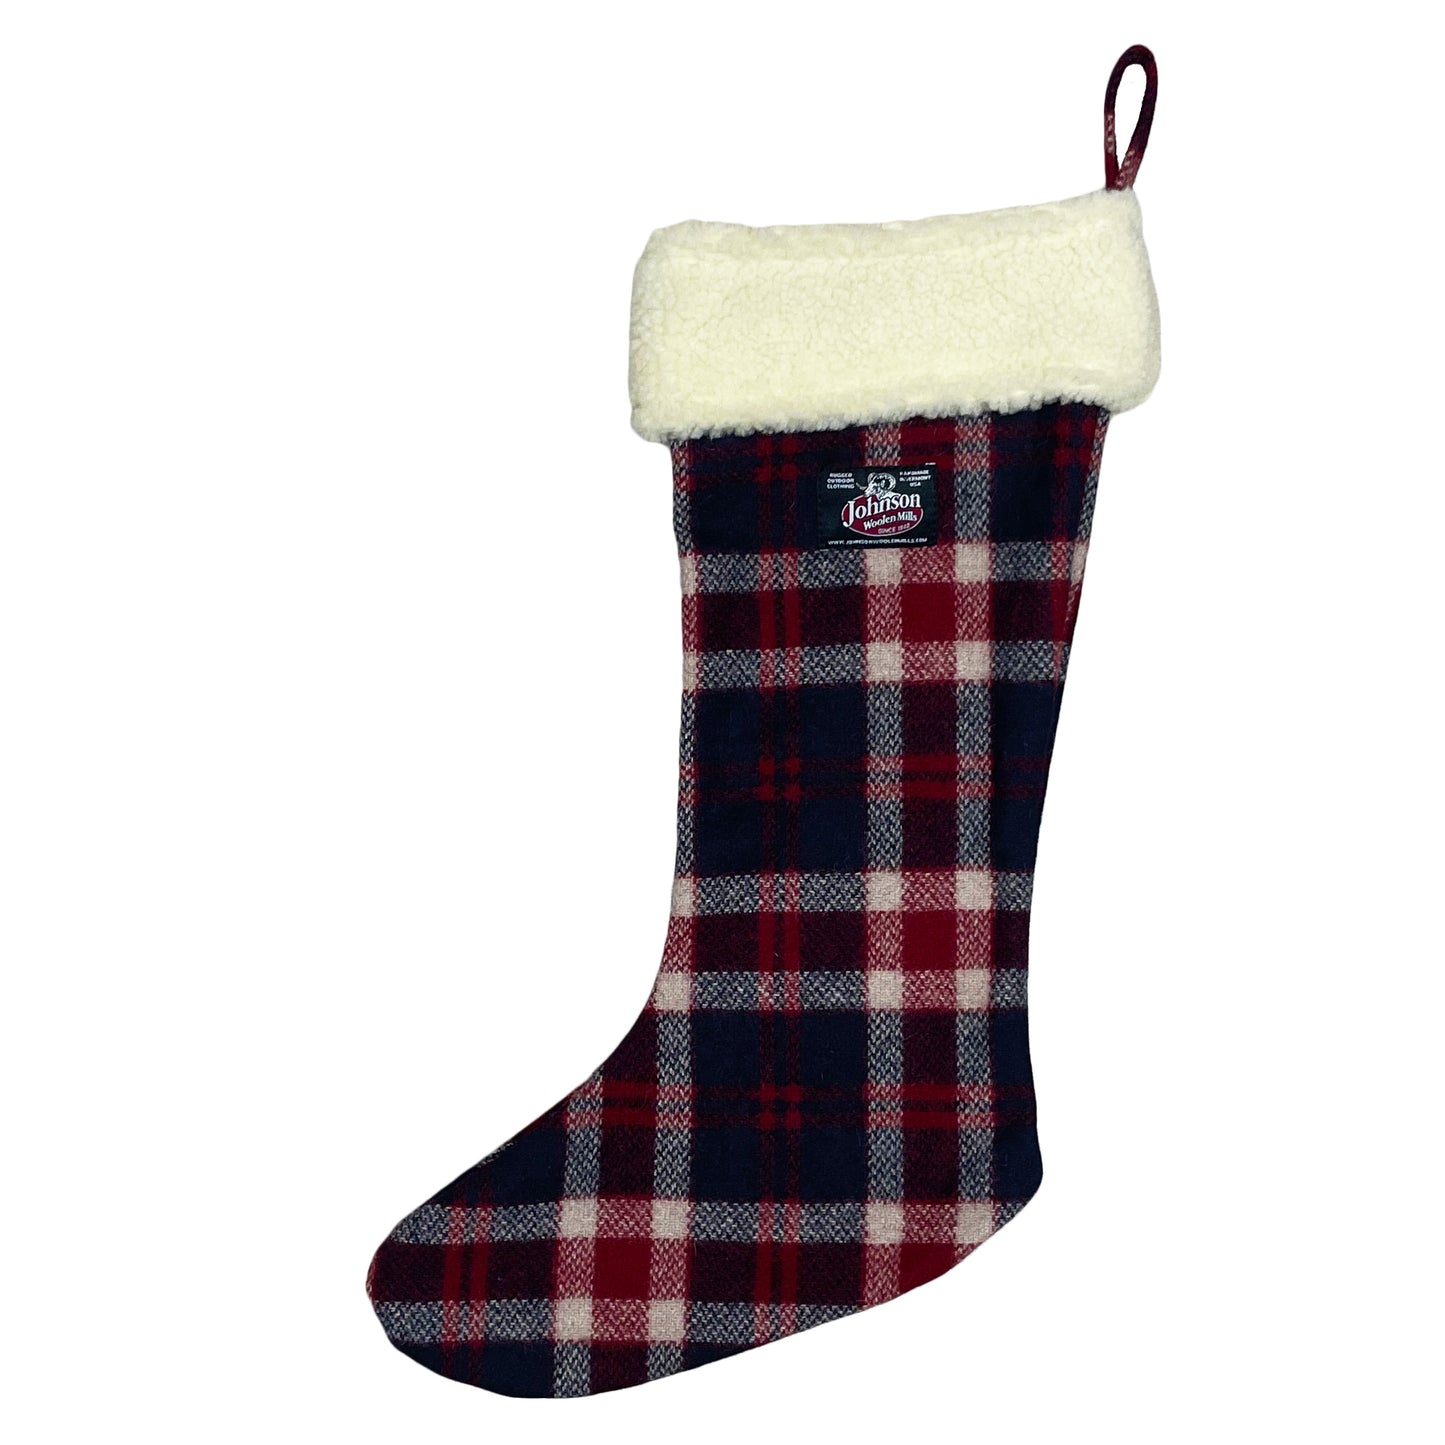 Johnson Woolen Mills red, blue and white wool Christmas stocking